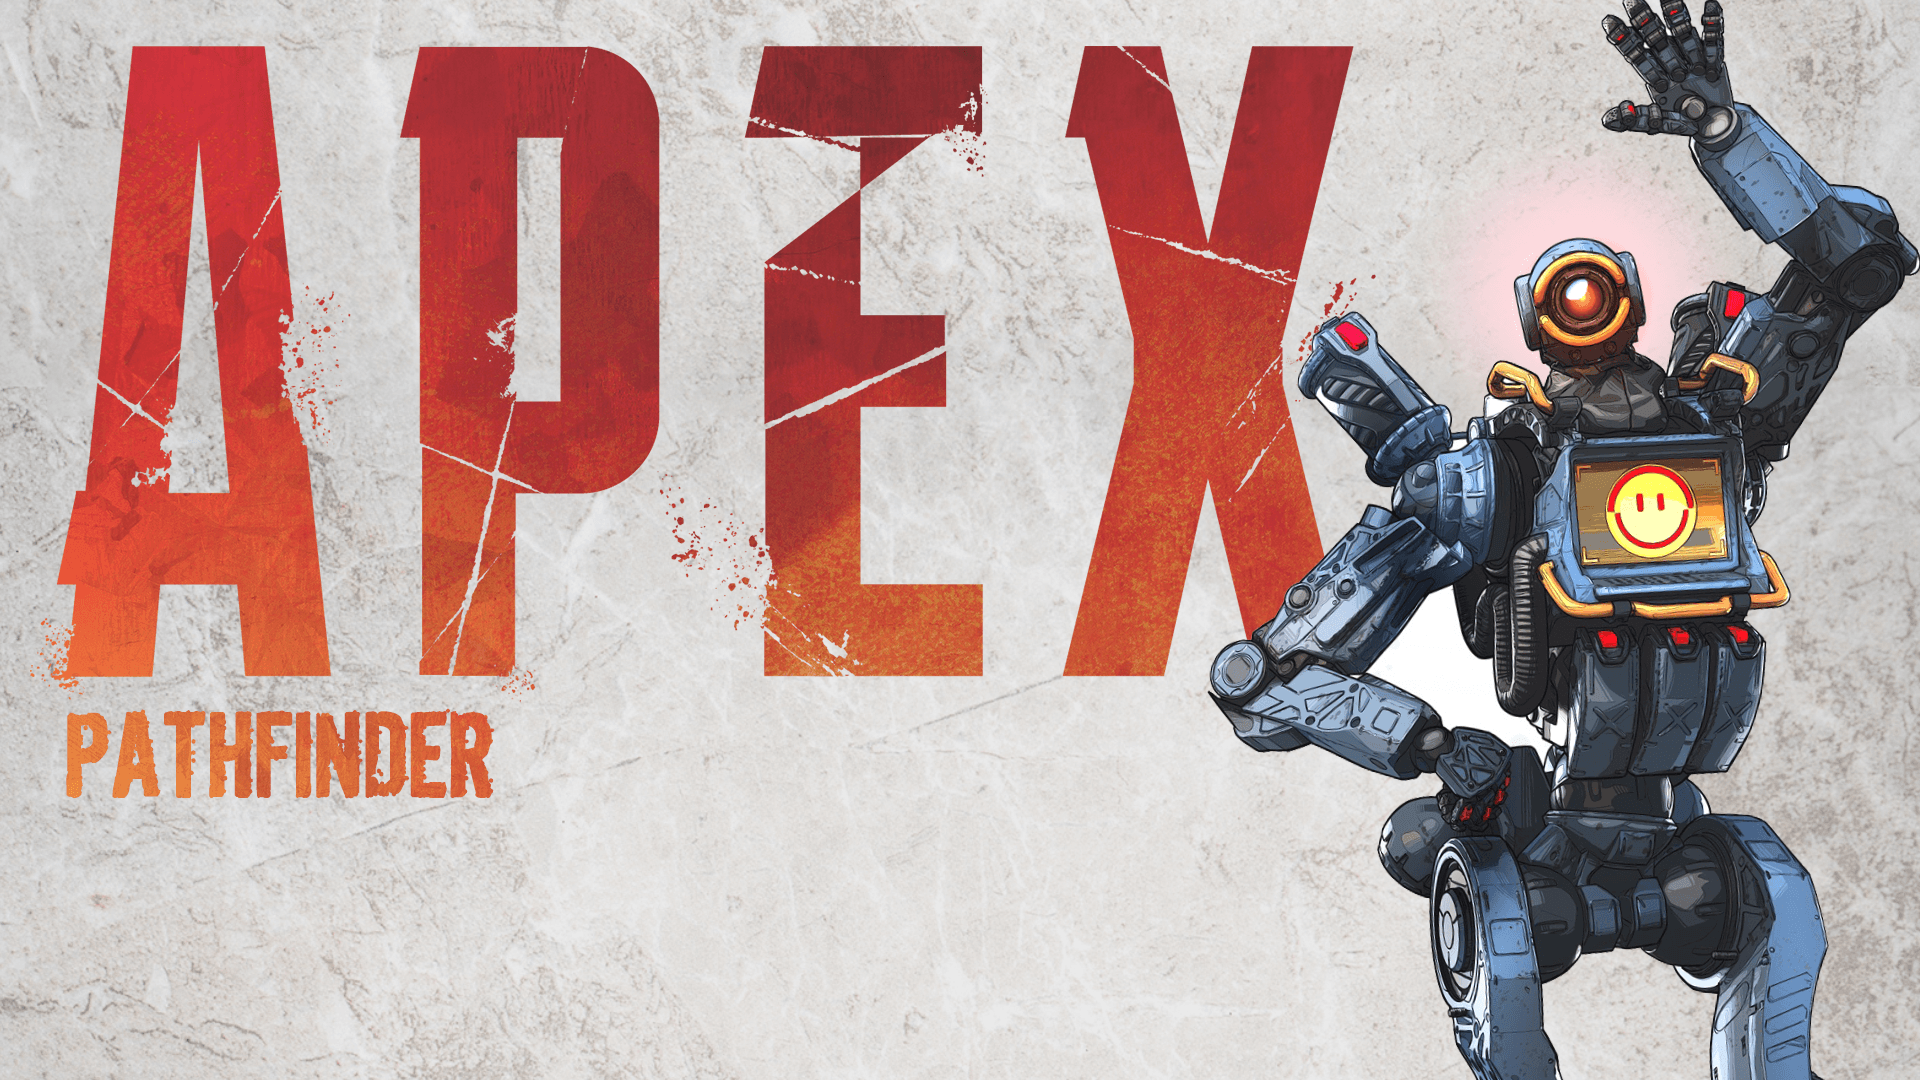 APEX LEGENDS WALLPAPERS (all characters)